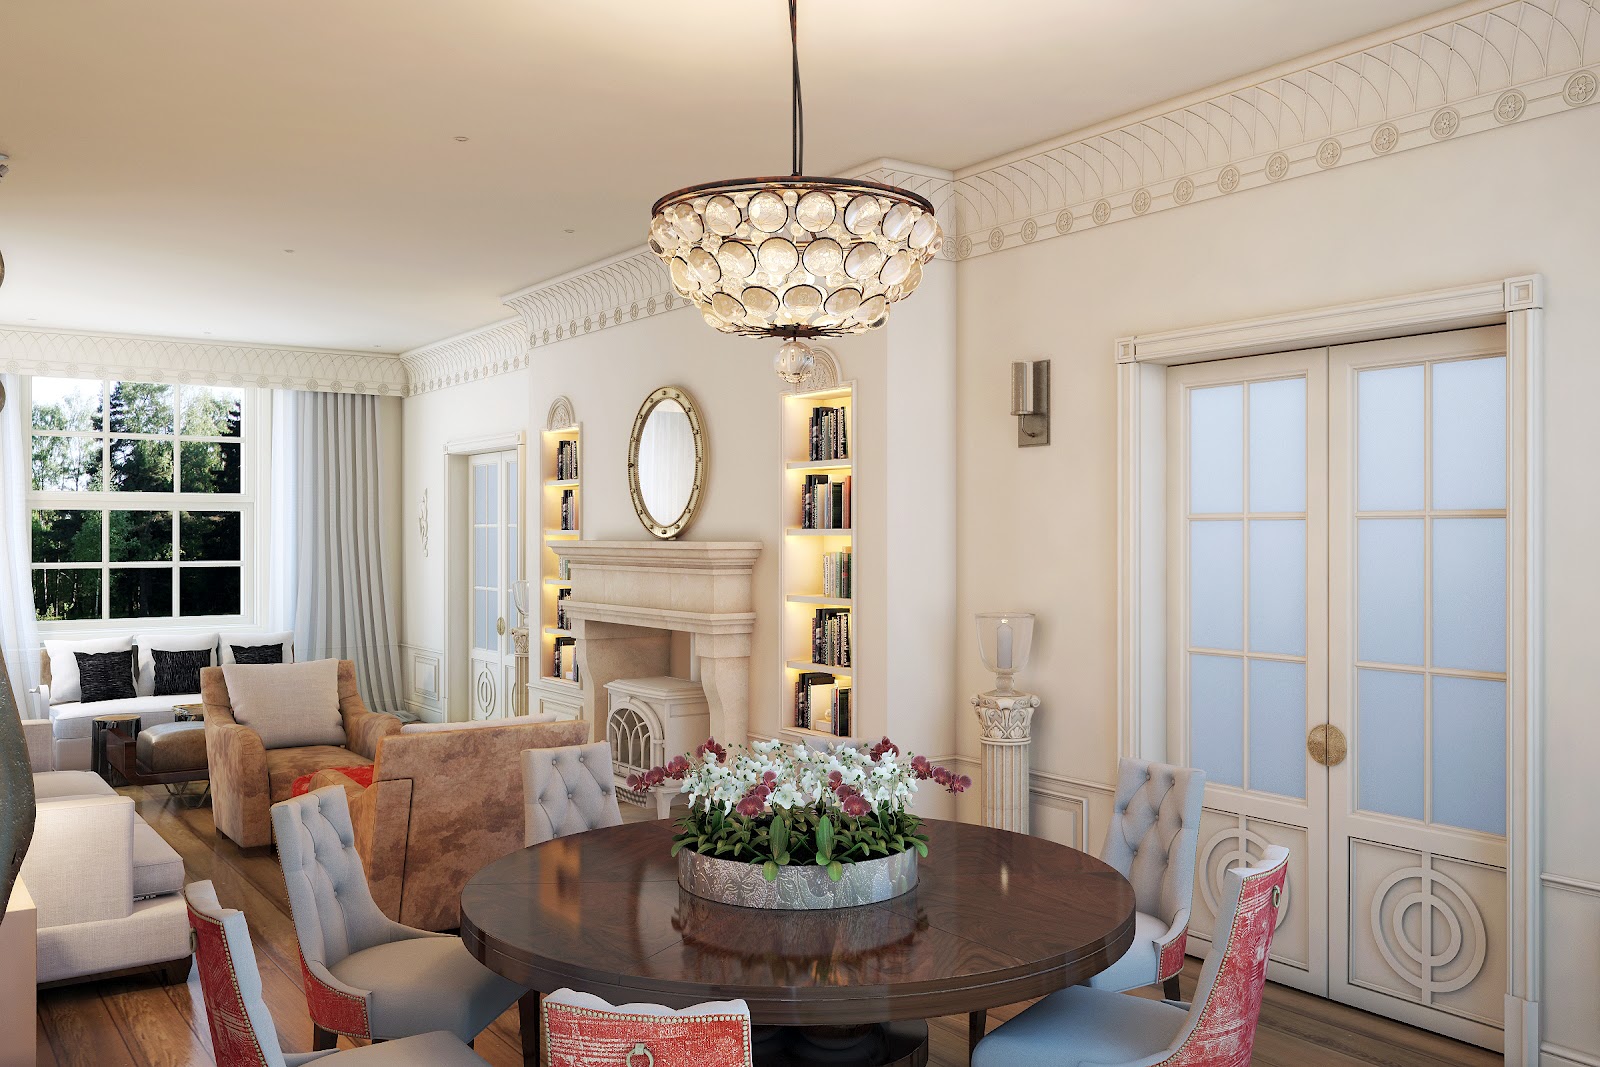 A rendering of a dining room with a chandelier showcasing the depth of white in 2016 interior design.